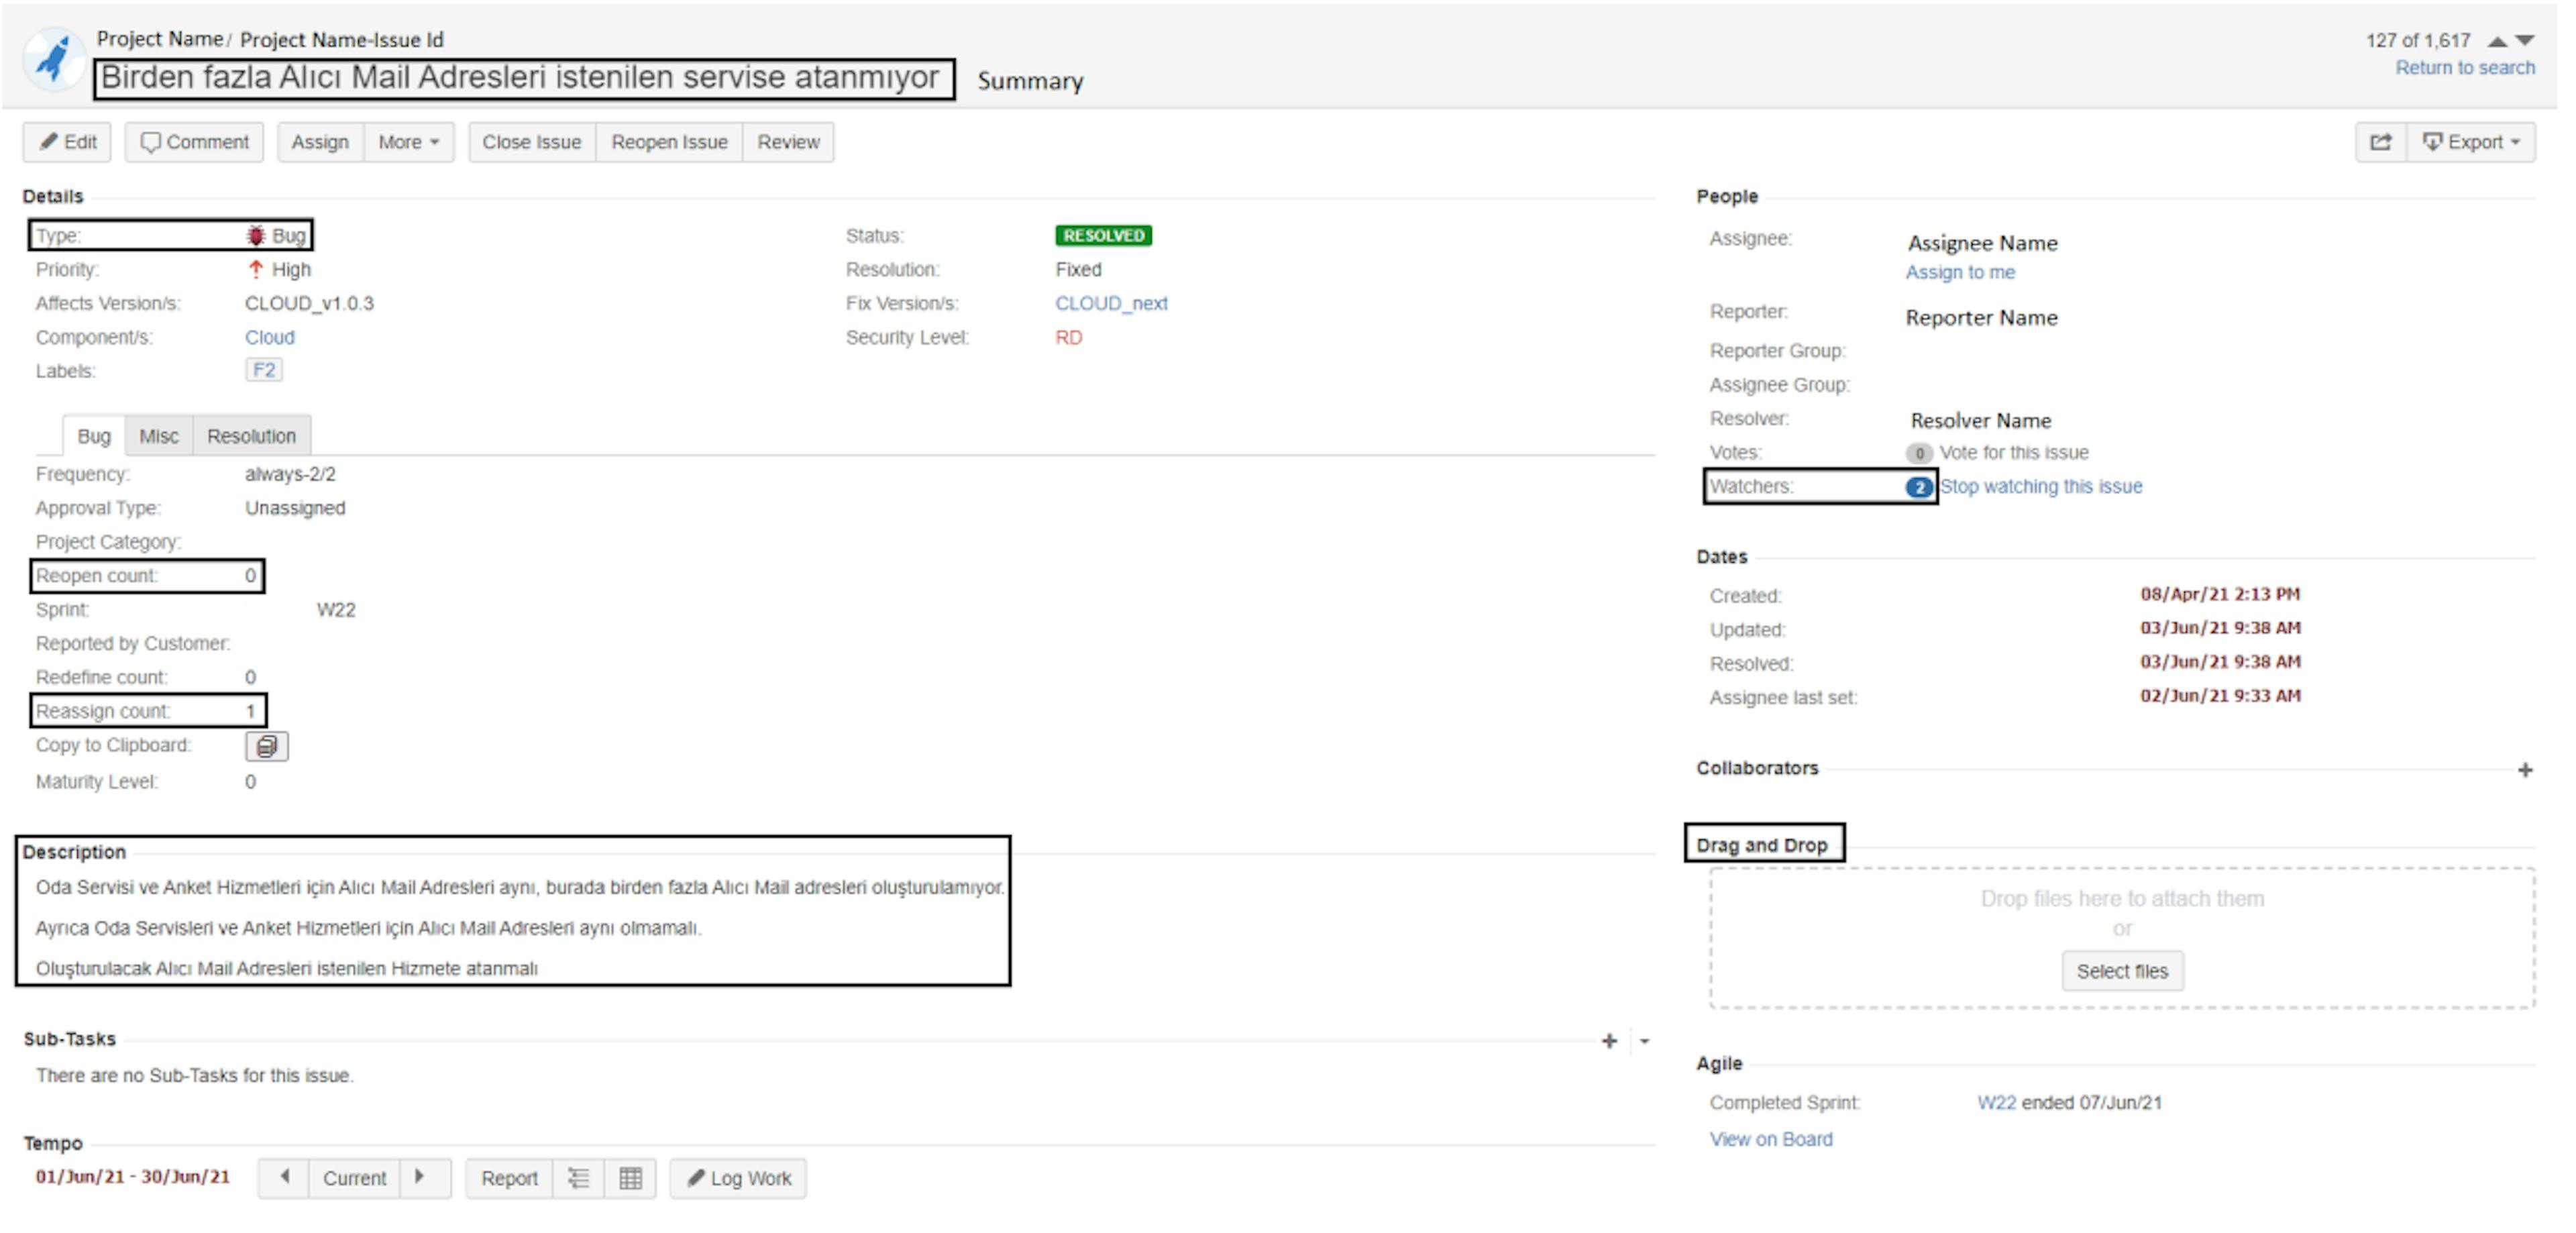 Fig. 1: An example issue from the Jira interface of the company.